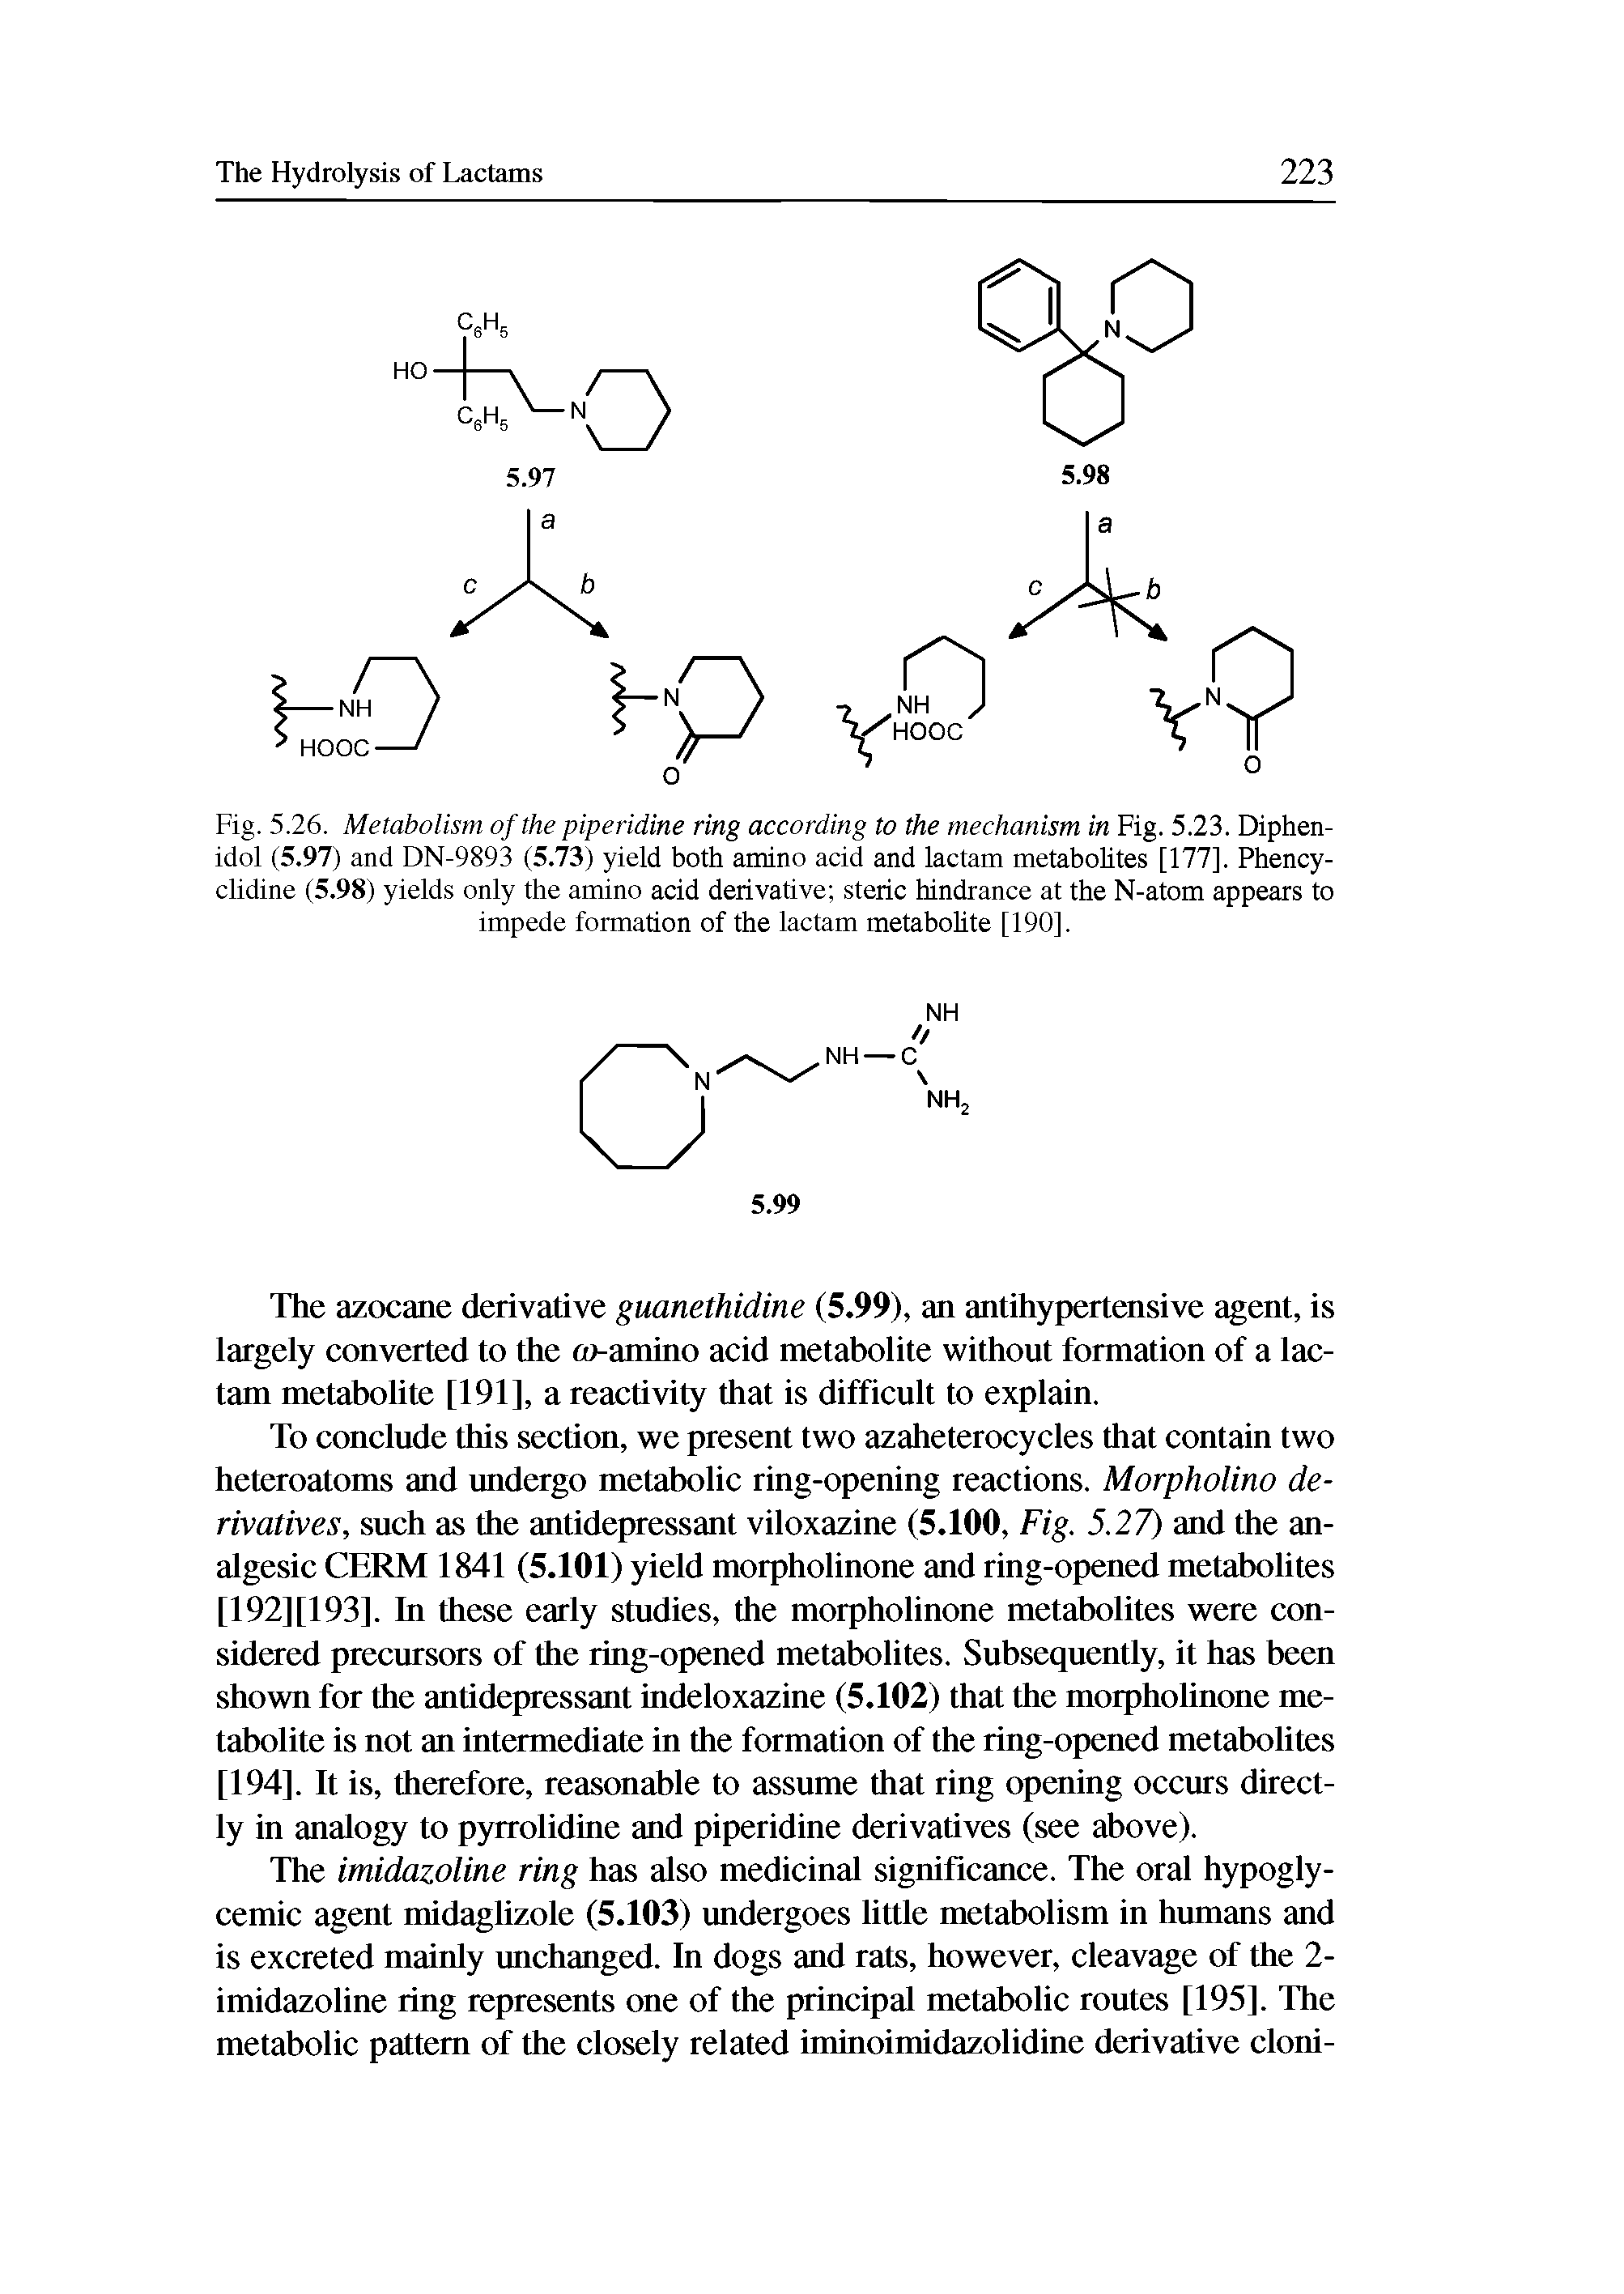 Fig. 5.26. Metabolism of the piperidine ring according to the mechanism in Fig. 5.23. Diphen-idol (5.97) and DN-9893 (5.73) yield both amino acid and lactam metabolites [177], Phencyclidine (5.98) yields only the amino acid derivative steric hindrance at the N-atom appears to impede formation of the lactam metabolite [190].